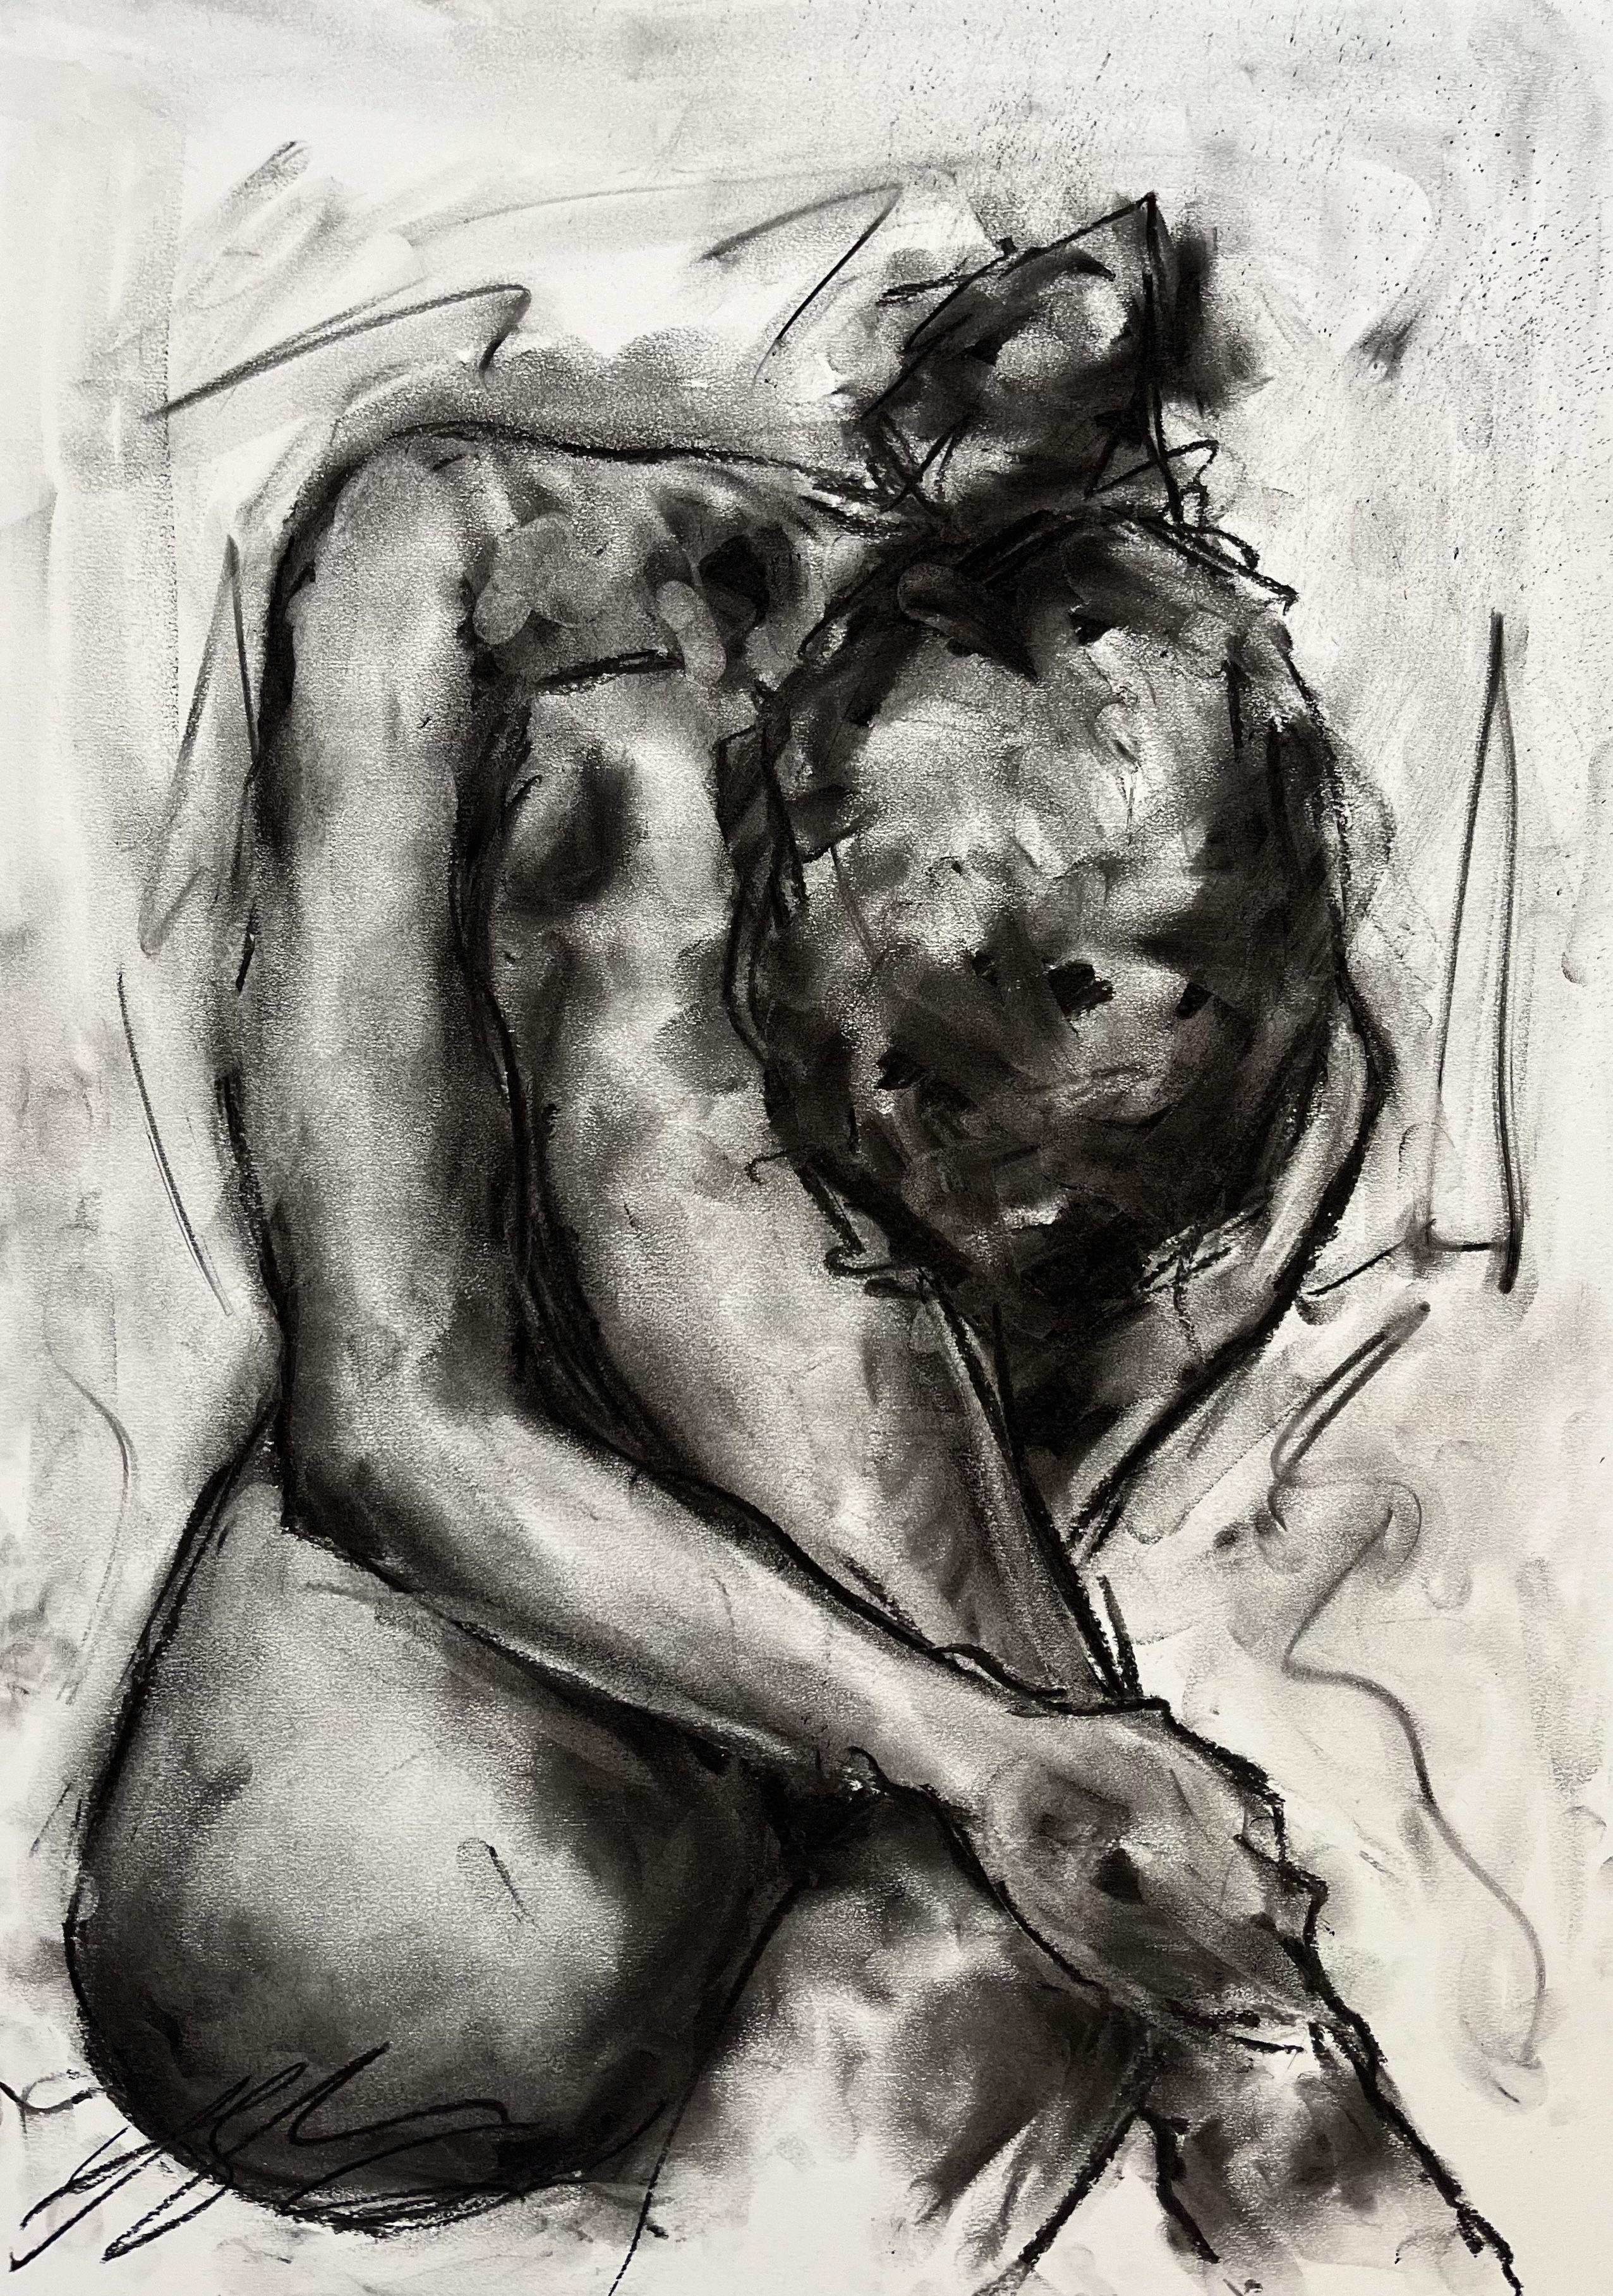 Reactions, Drawing, Charcoal on Paper - Art by James Shipton